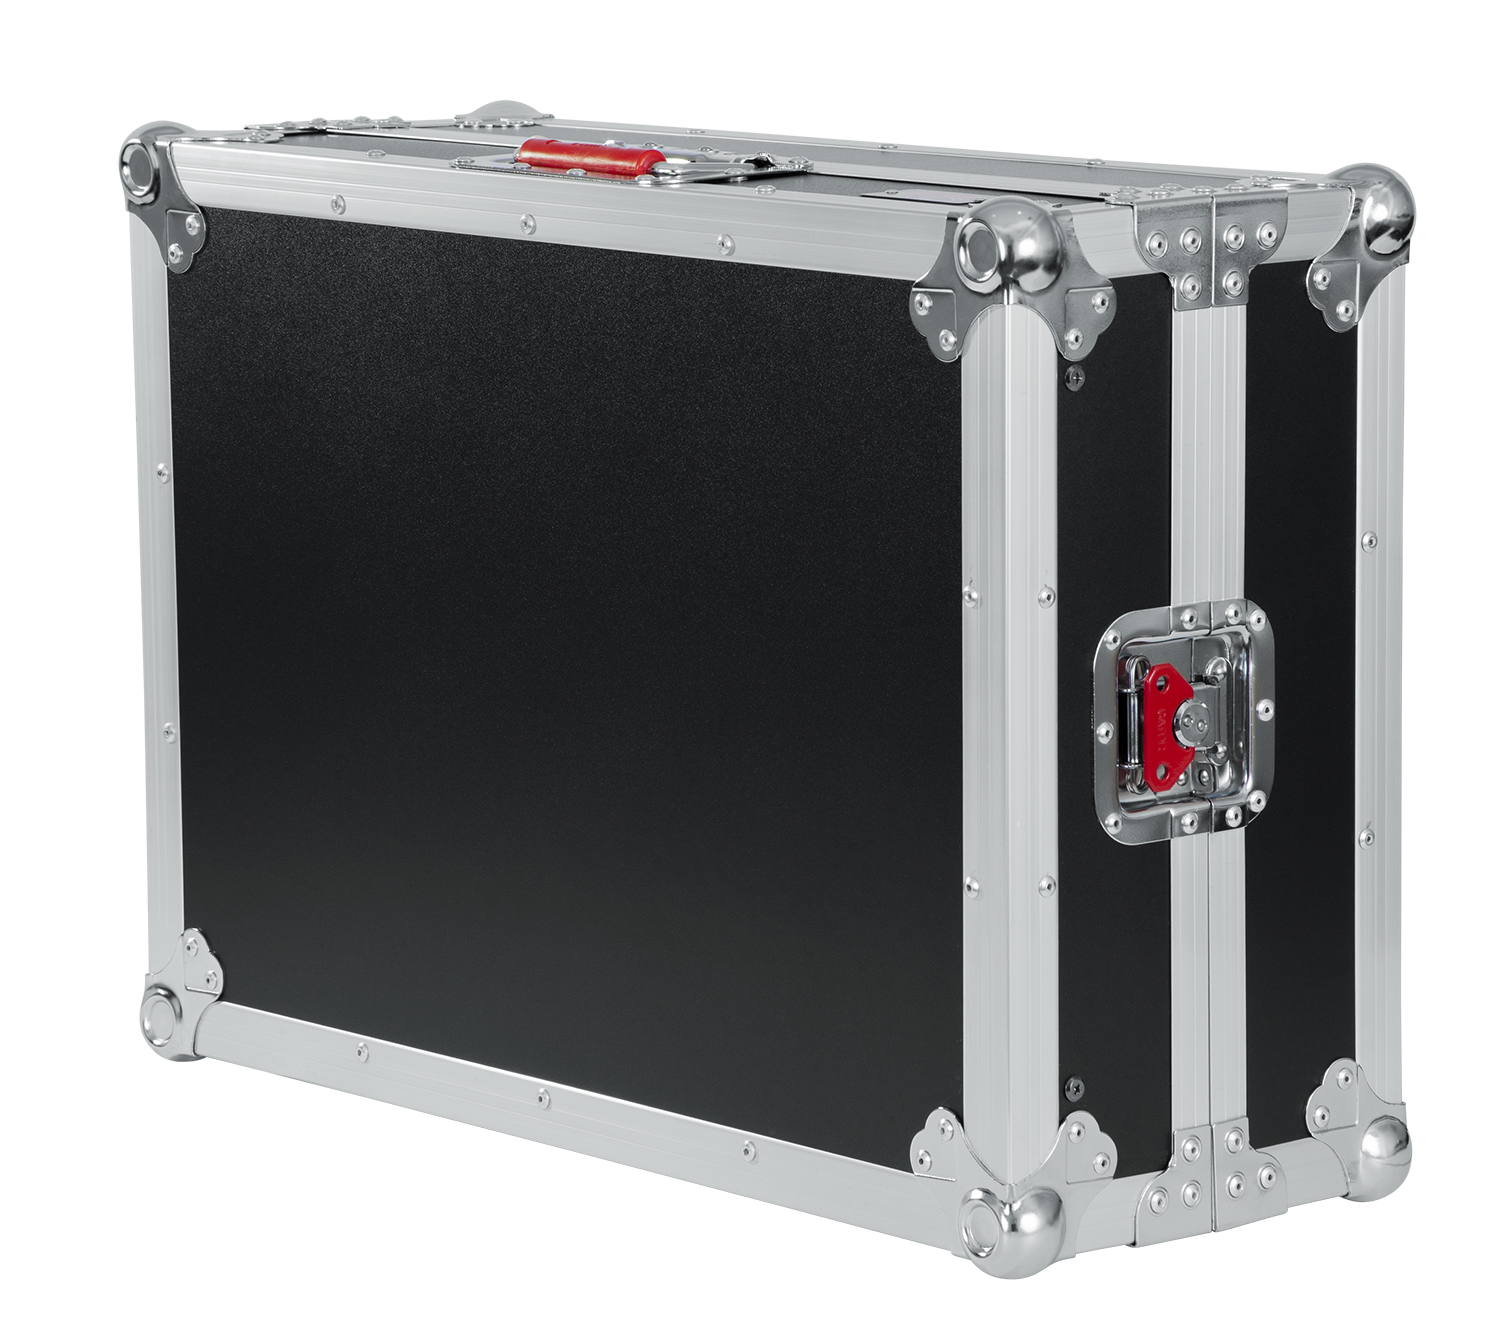 G-TOUR DSP case for small sized DJ controllers